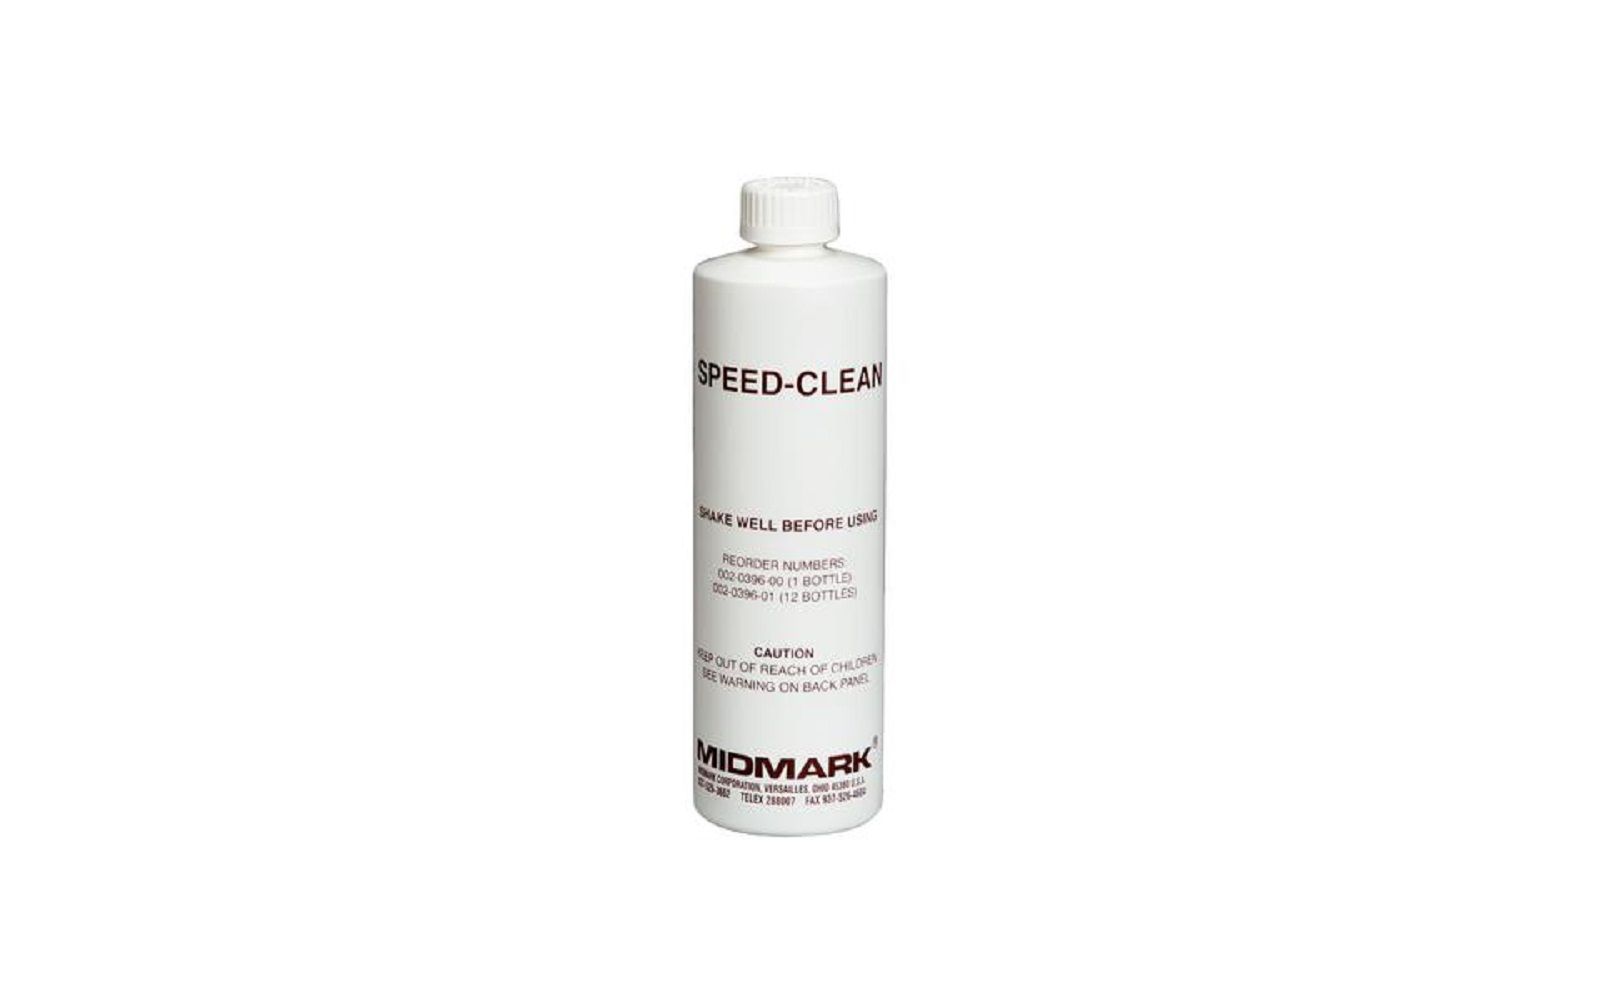 Speed-clean autoclave cleaner solution, 16 oz bottle